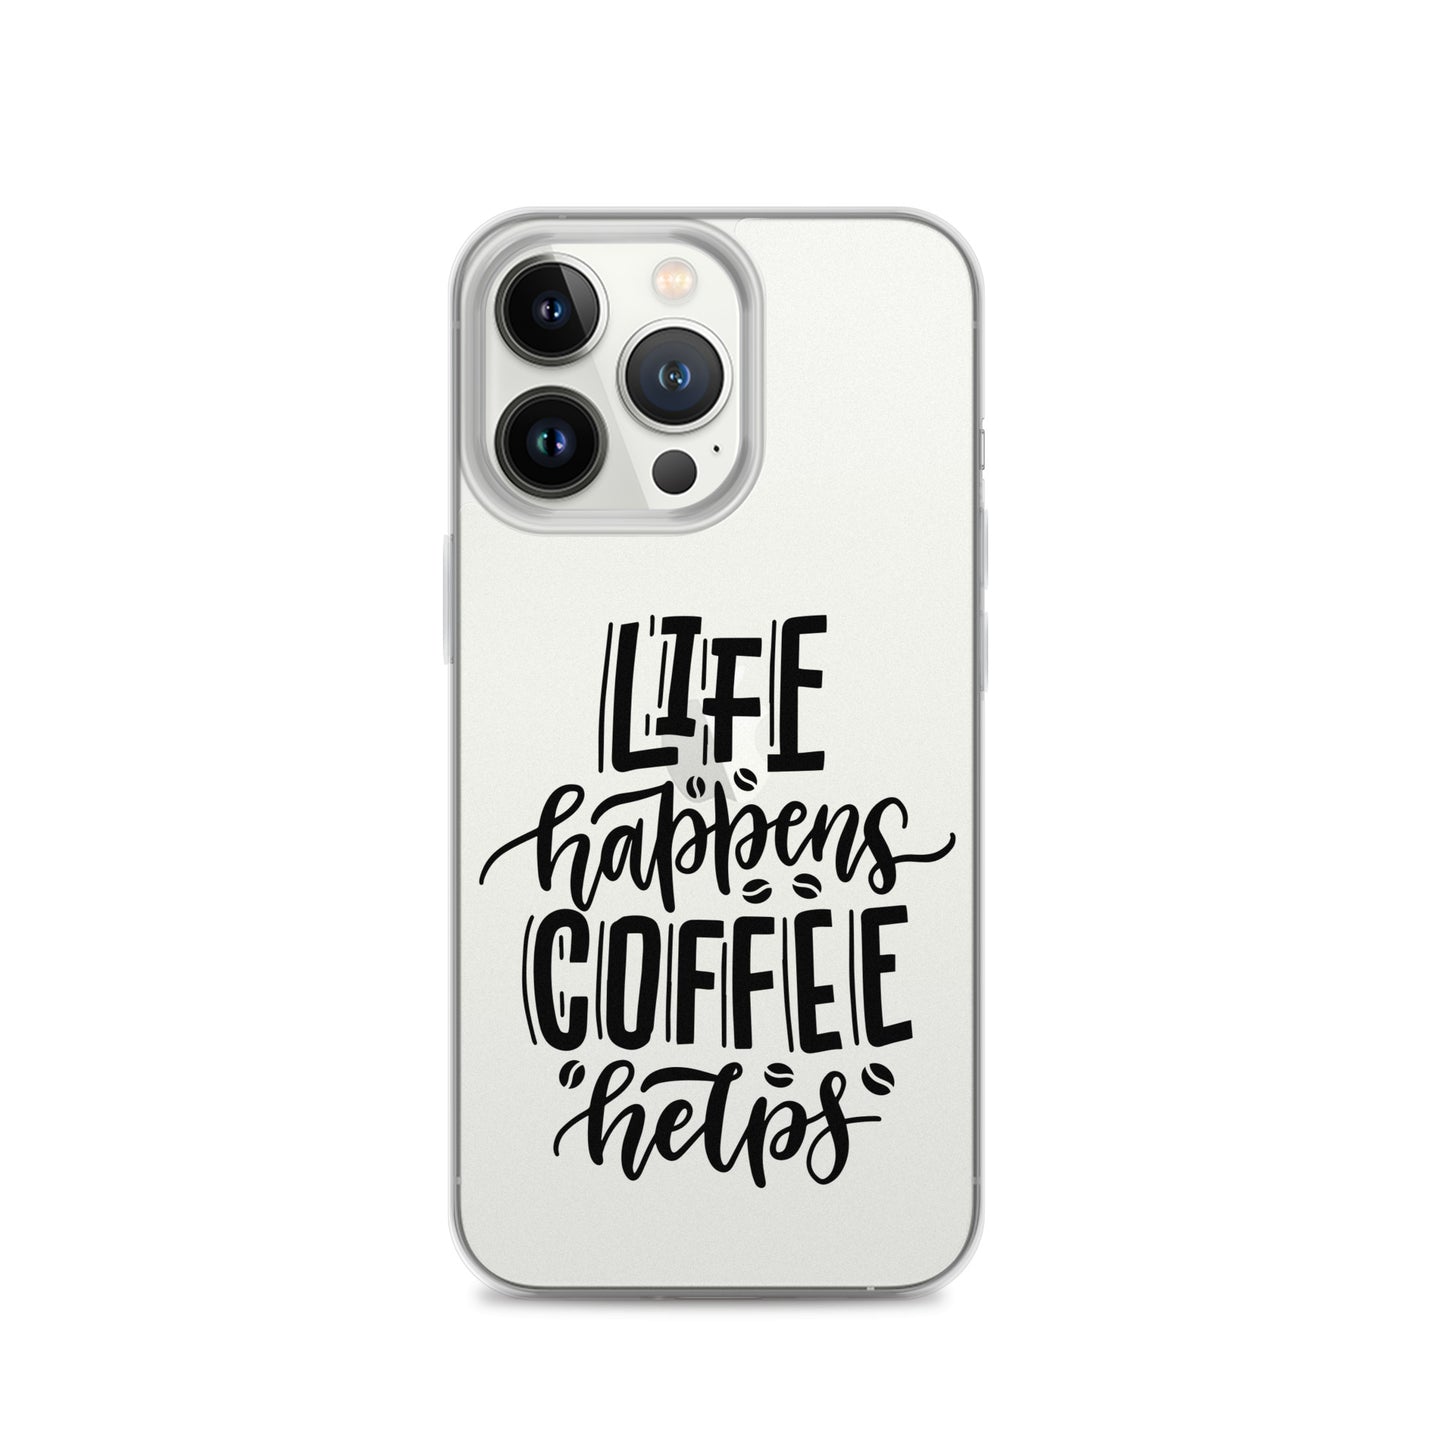 Life Happends Coffee Helps iPhone Case